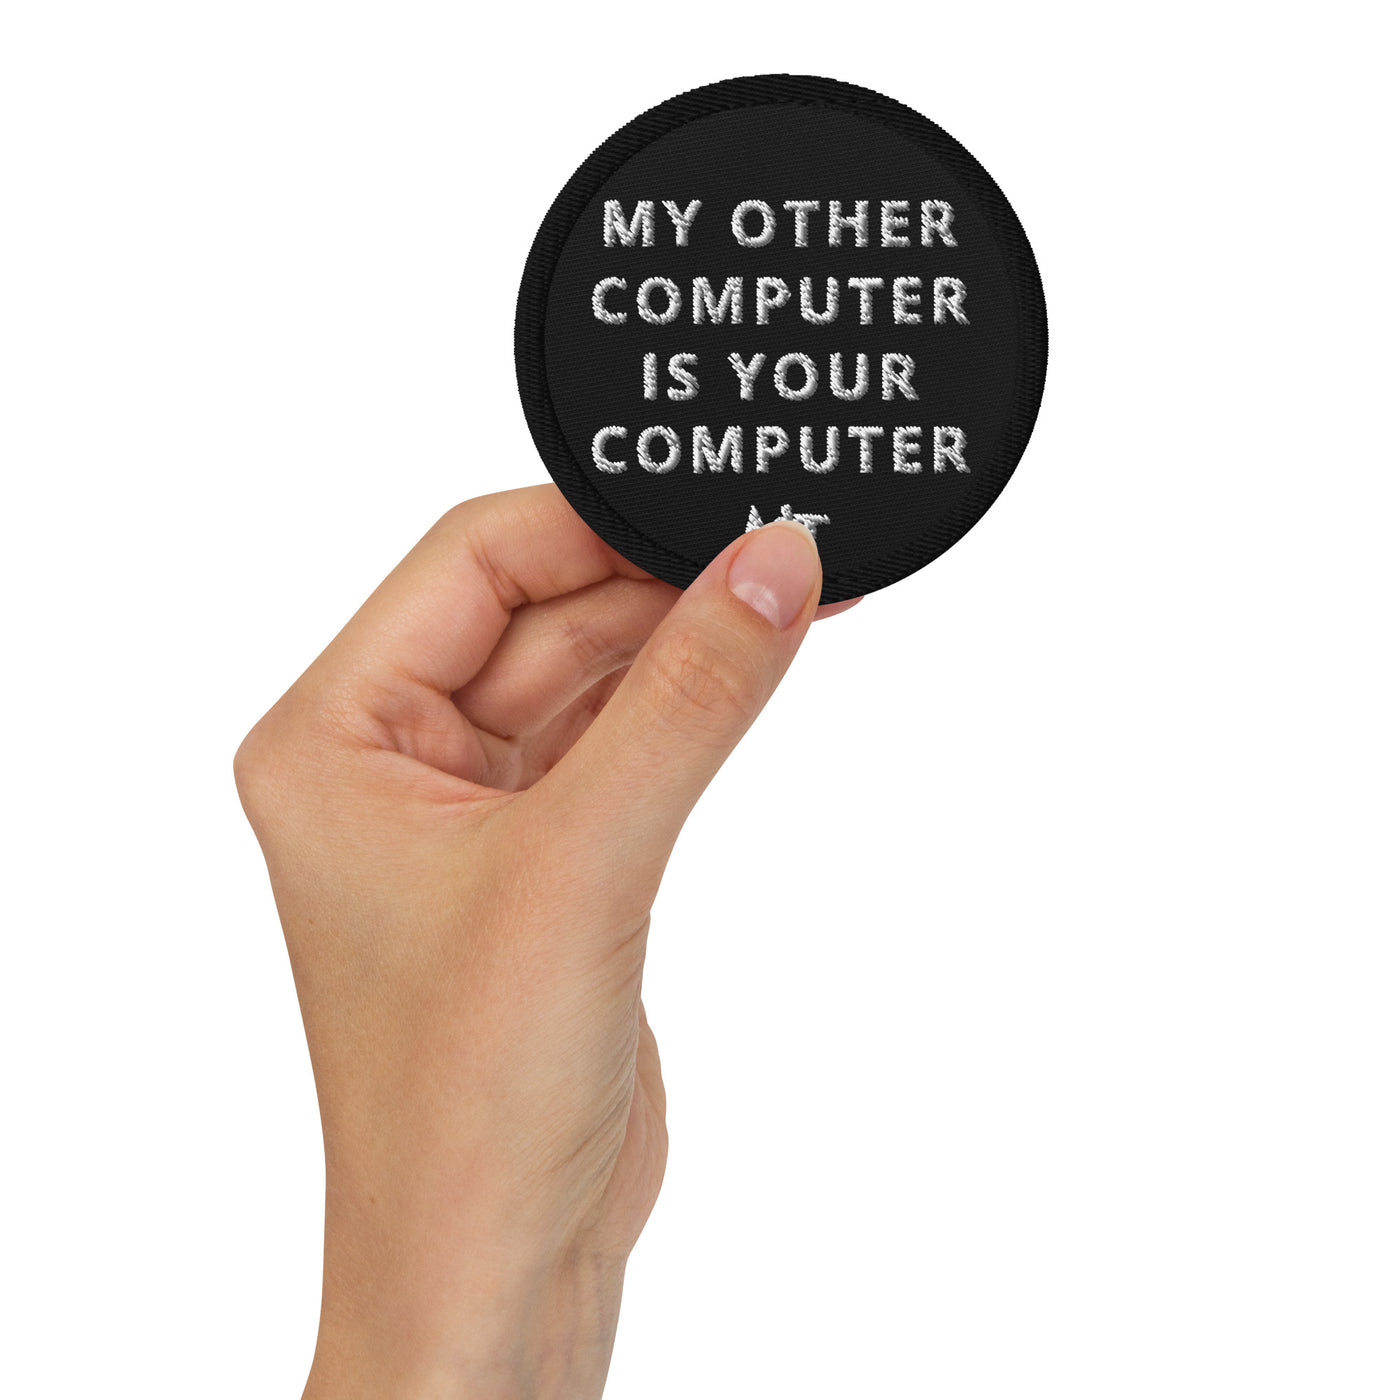 My other computer is your computer - Embroidered patches